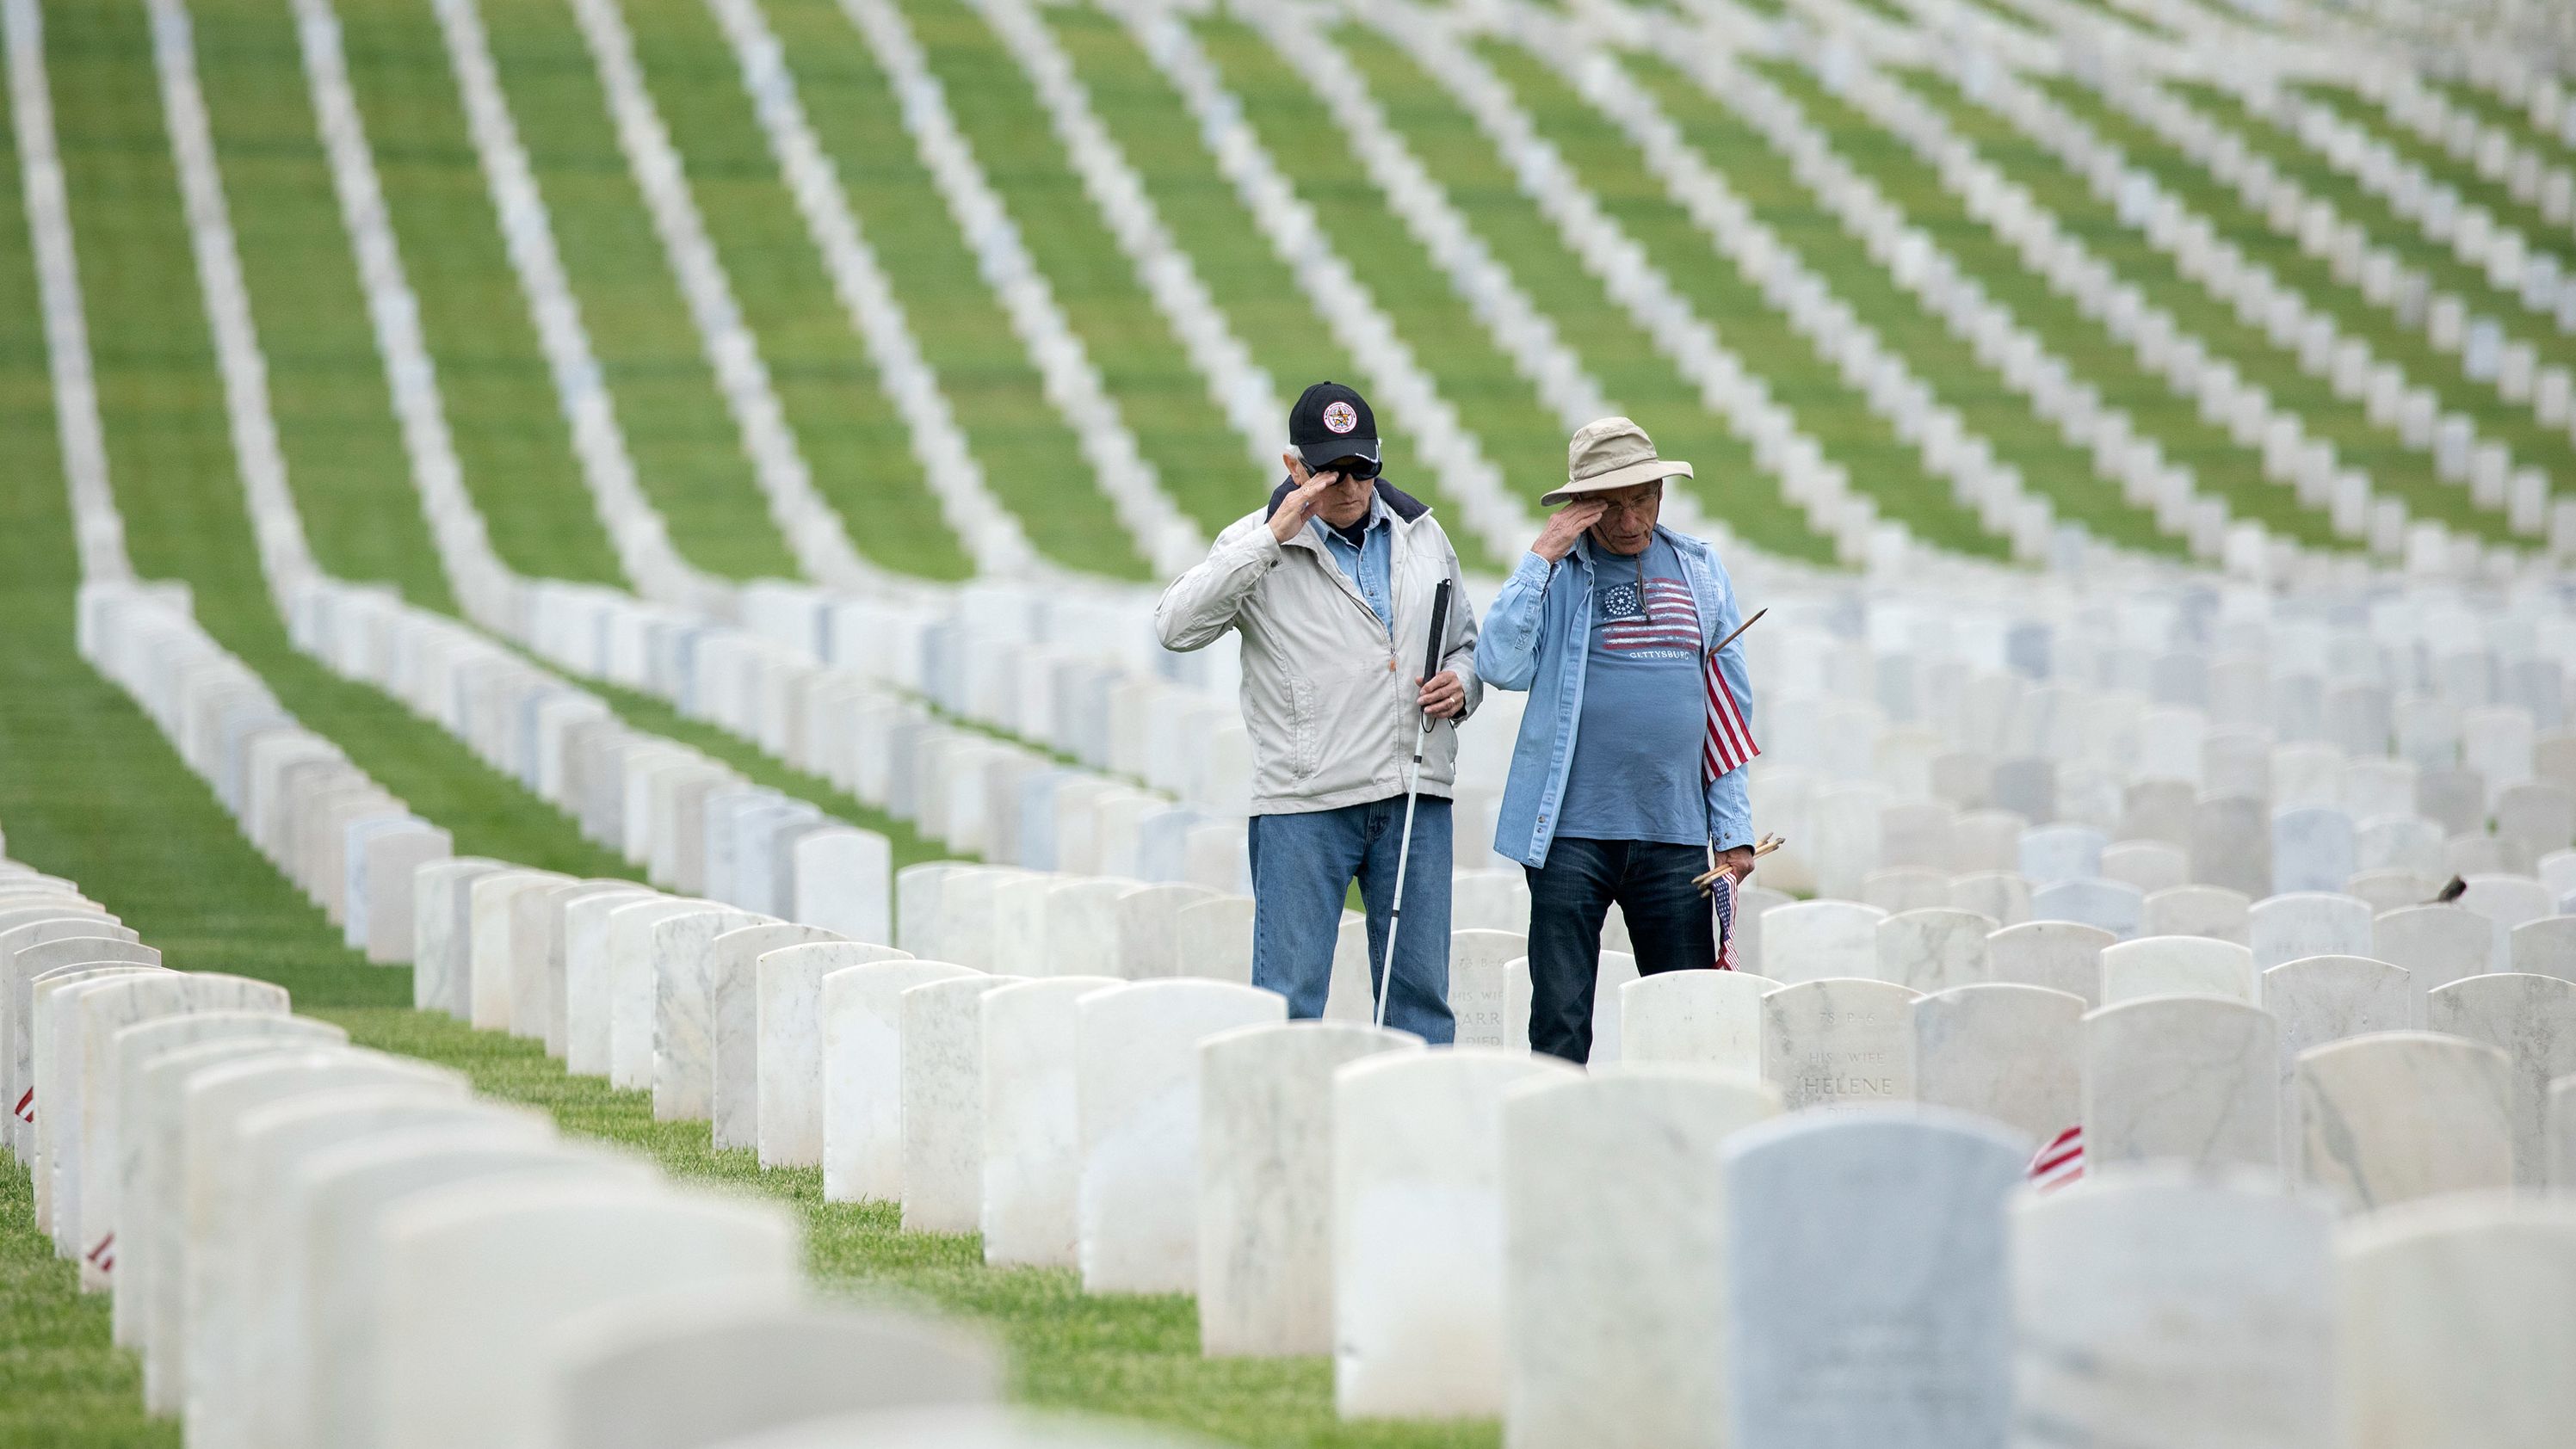 Air Force veteran Larry Bustetter, left, and Army veteran Henry Knebel salute after placing flags at the Los Angeles National Cemetery on Saturday.